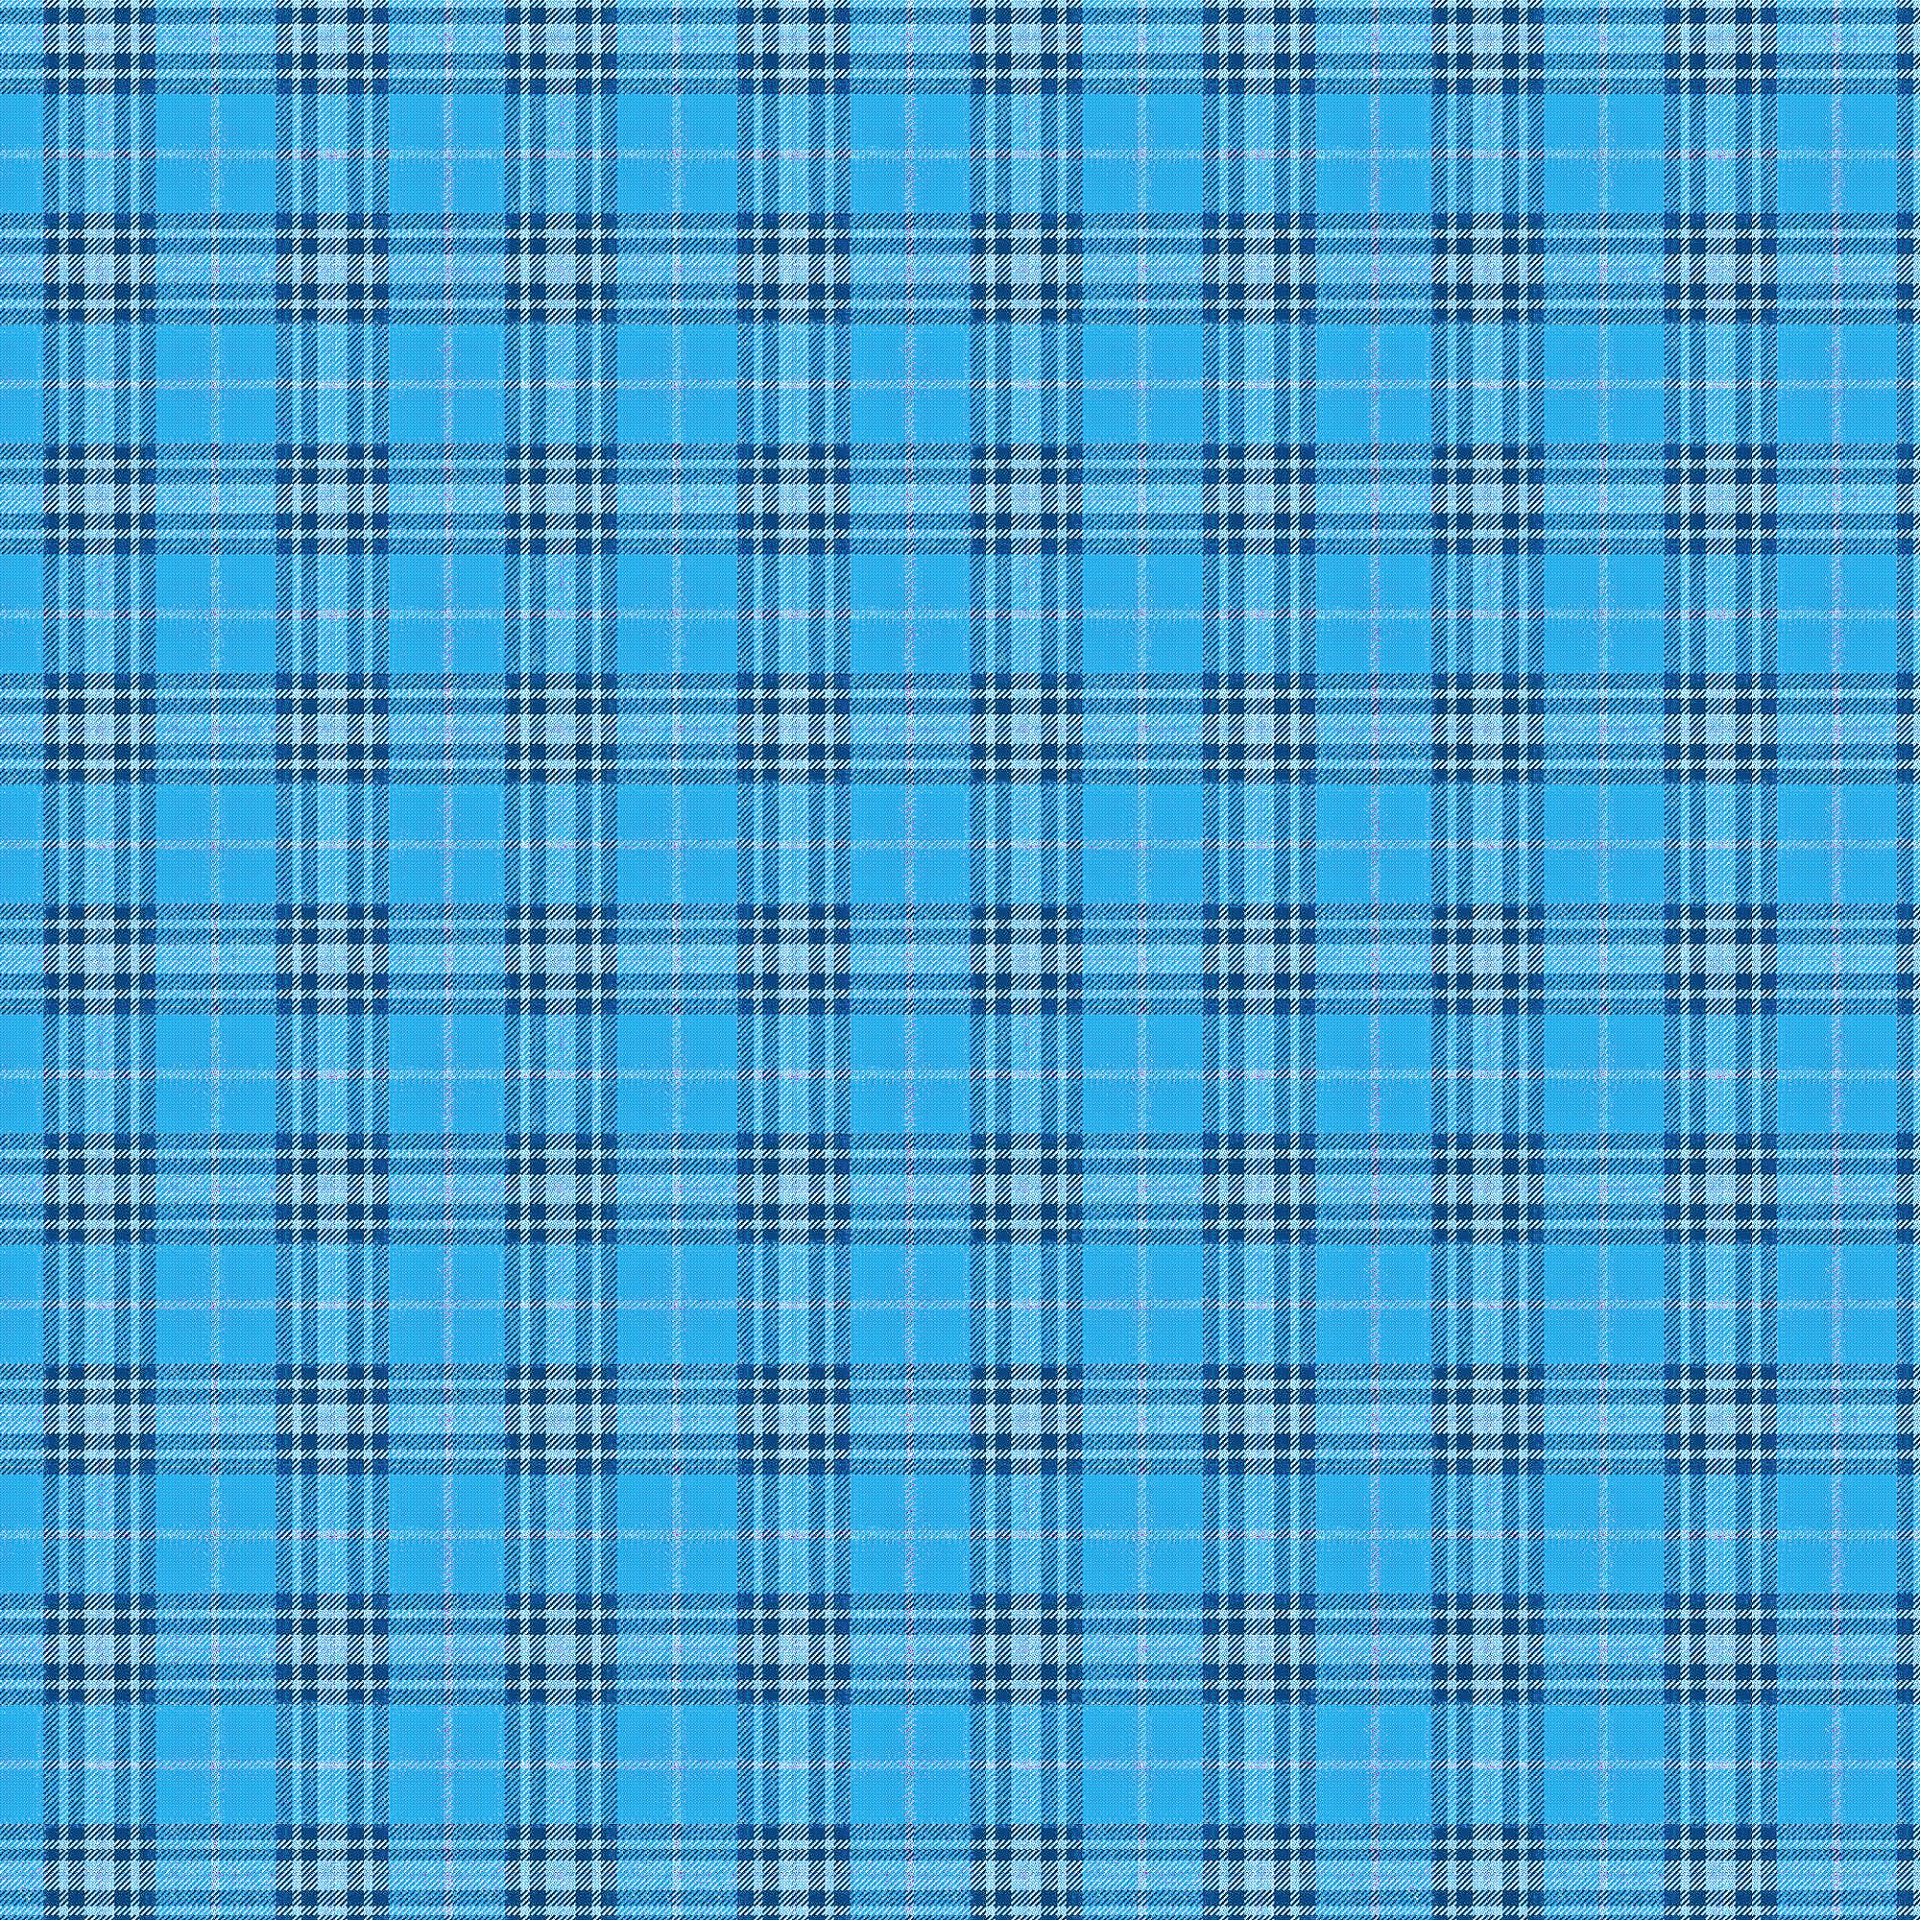 The Checkered Tablecloth